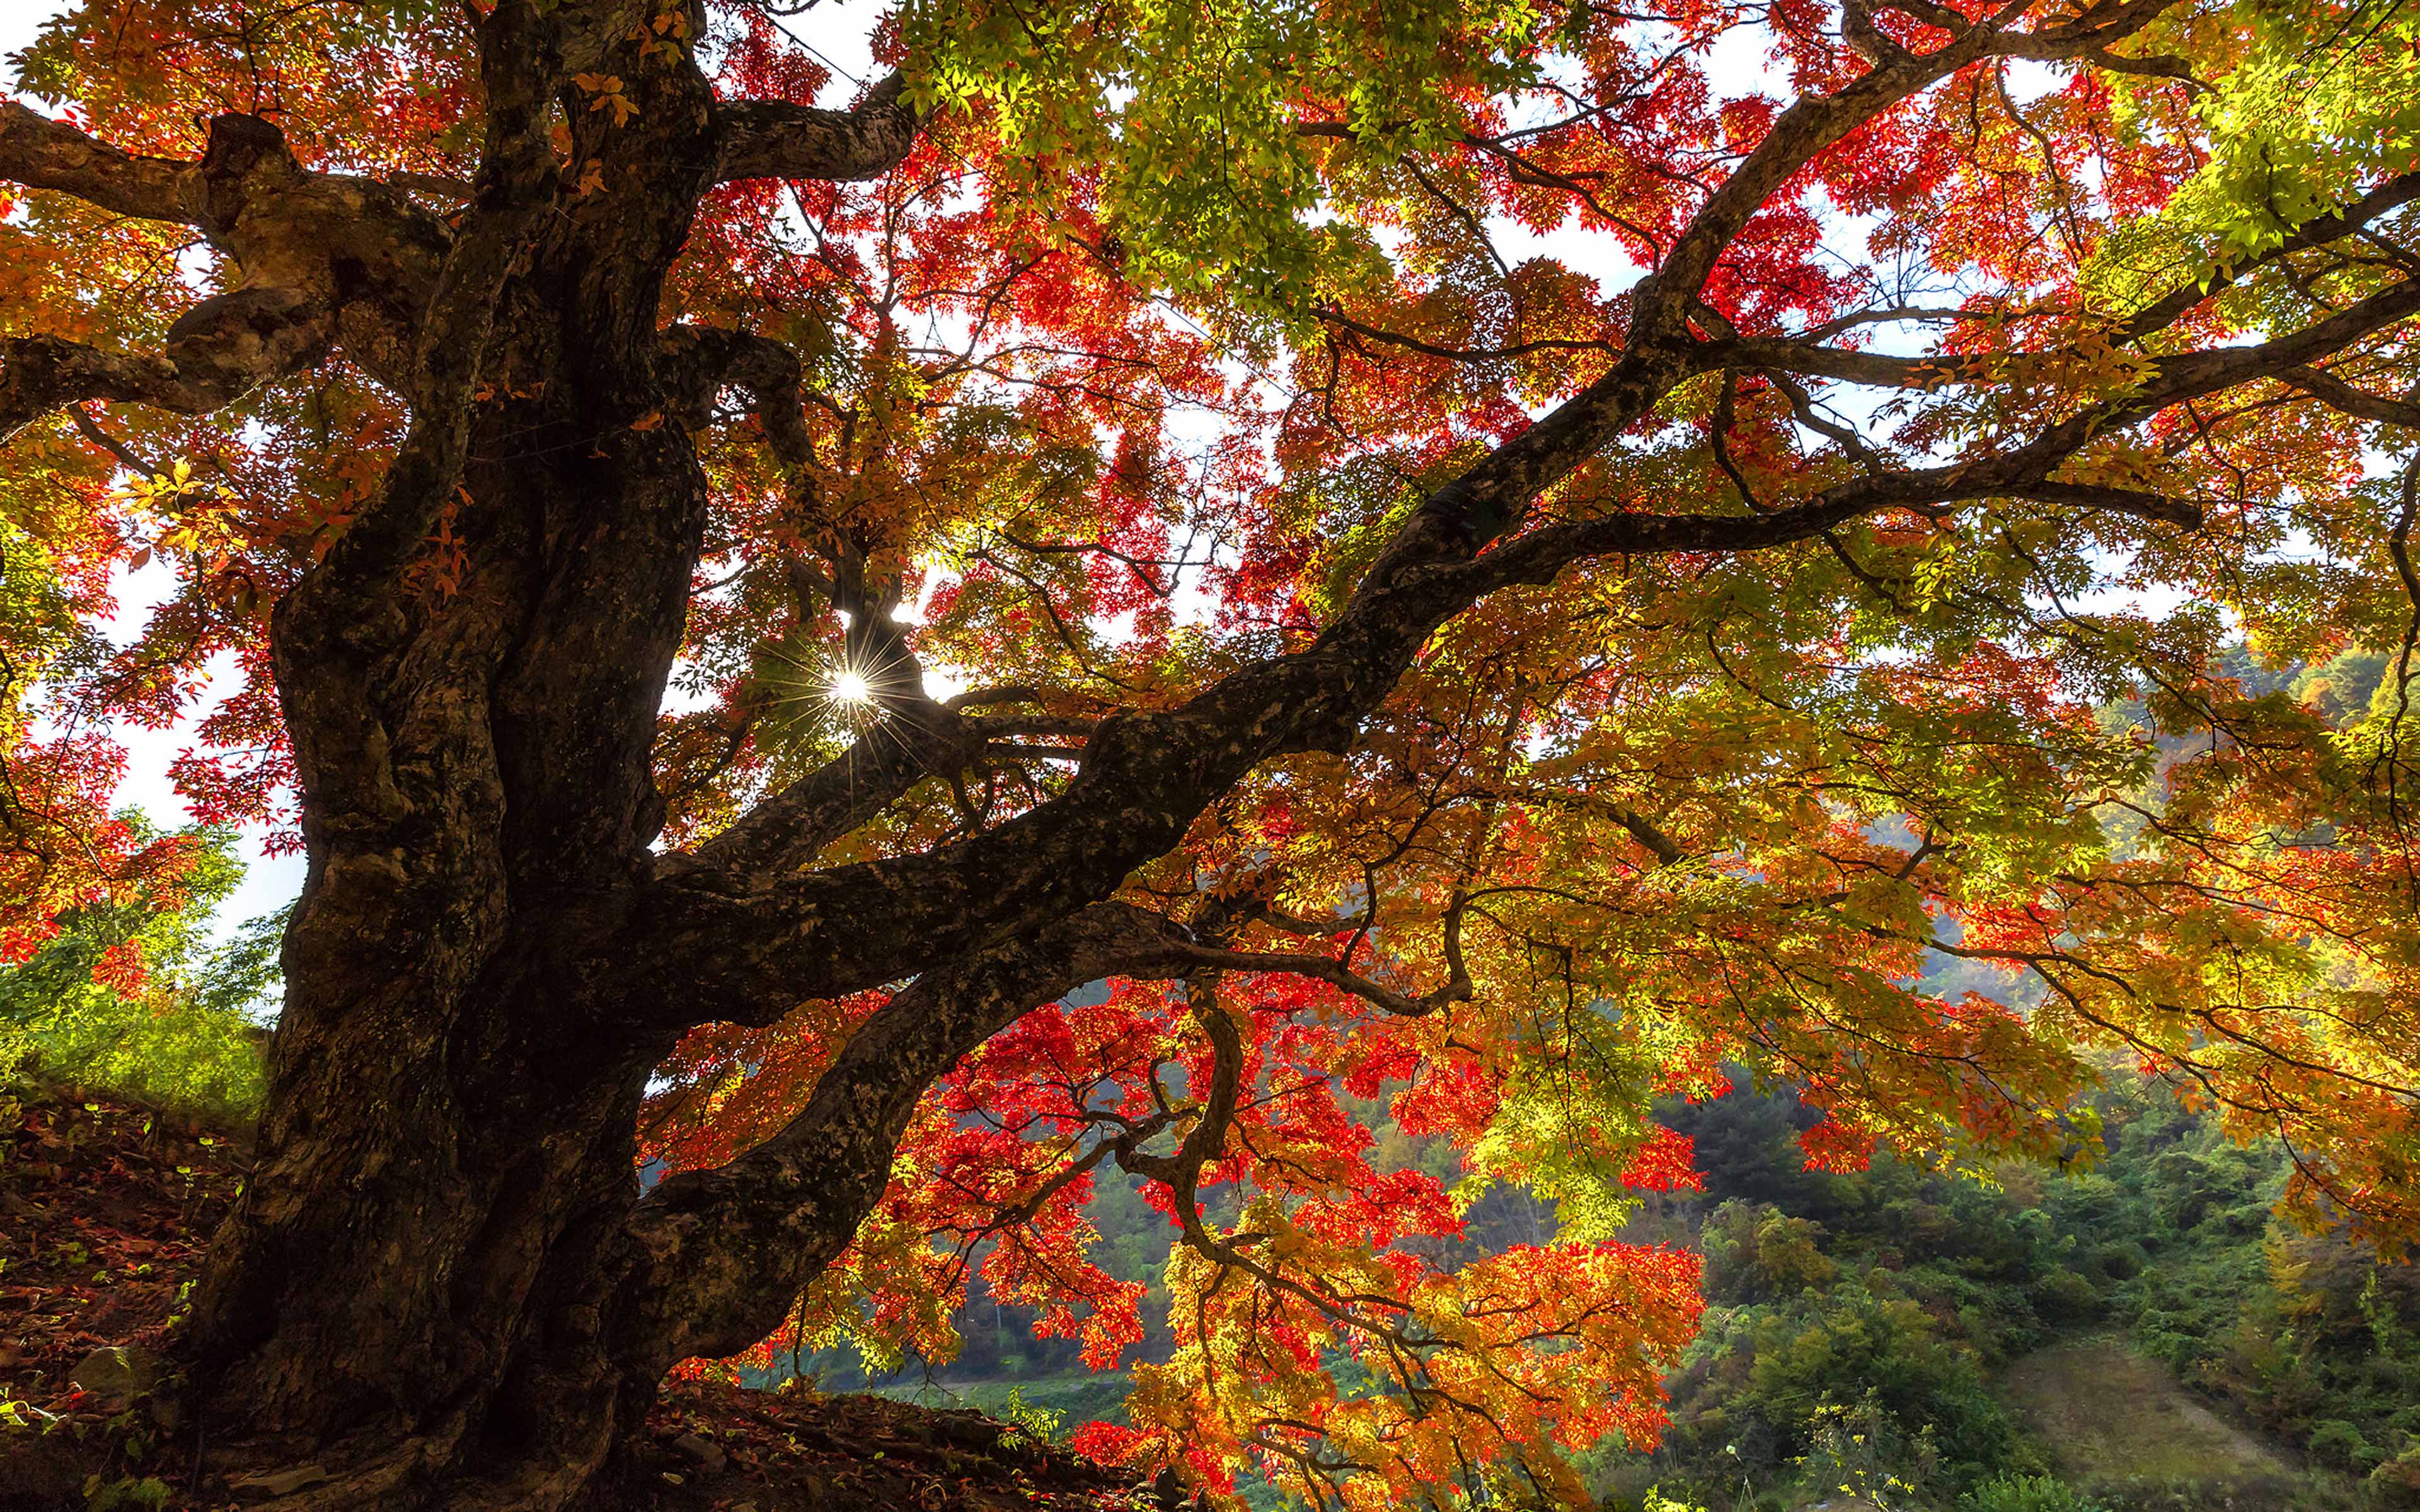 Landscapes Photography Autumn Old Wood Red Leaves Inje South Korea Desktop HD Wallpaper For Pc Tablet And Mobile, Wallpaper13.com